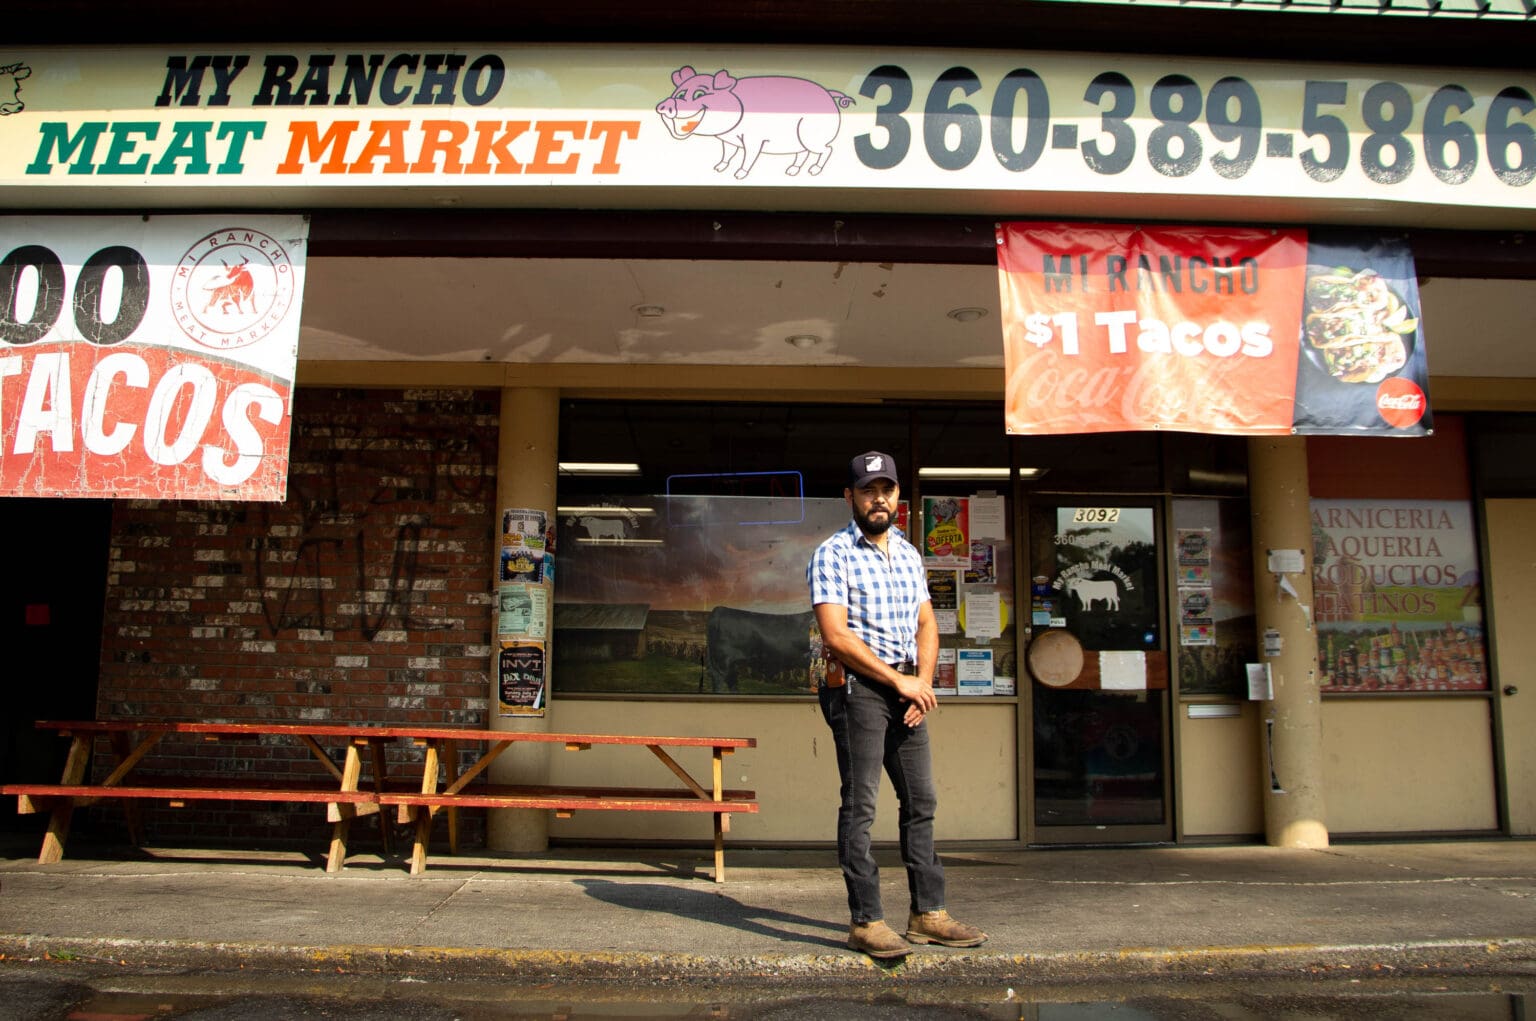 Luis Casillas is the owner of Mi Rancho stands in front of the store.